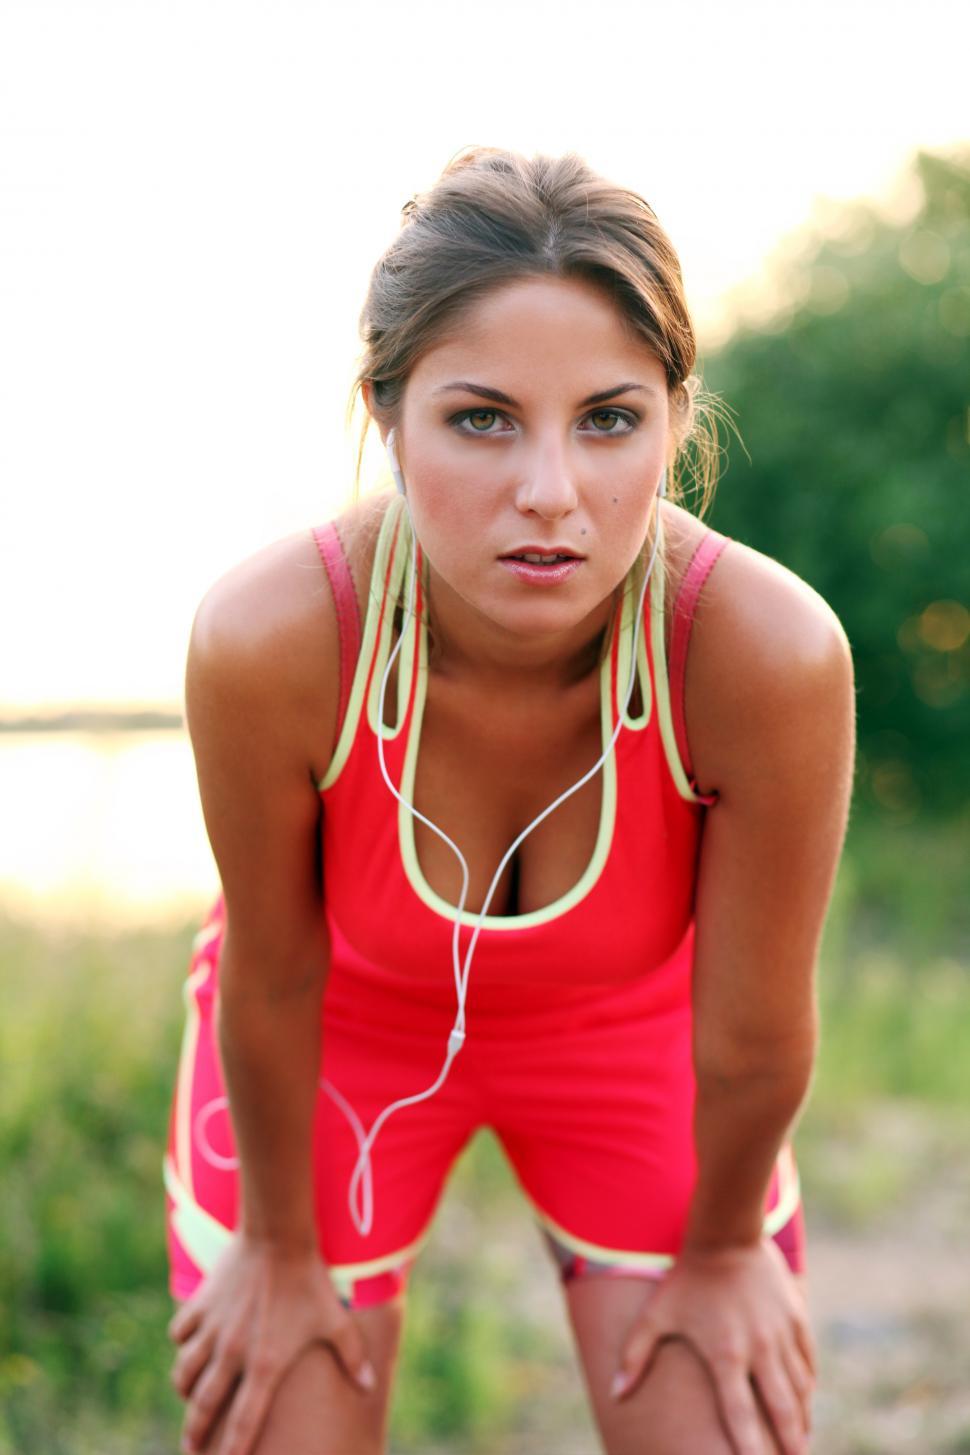 Download Free Stock Photo of Woman after an evening jog 